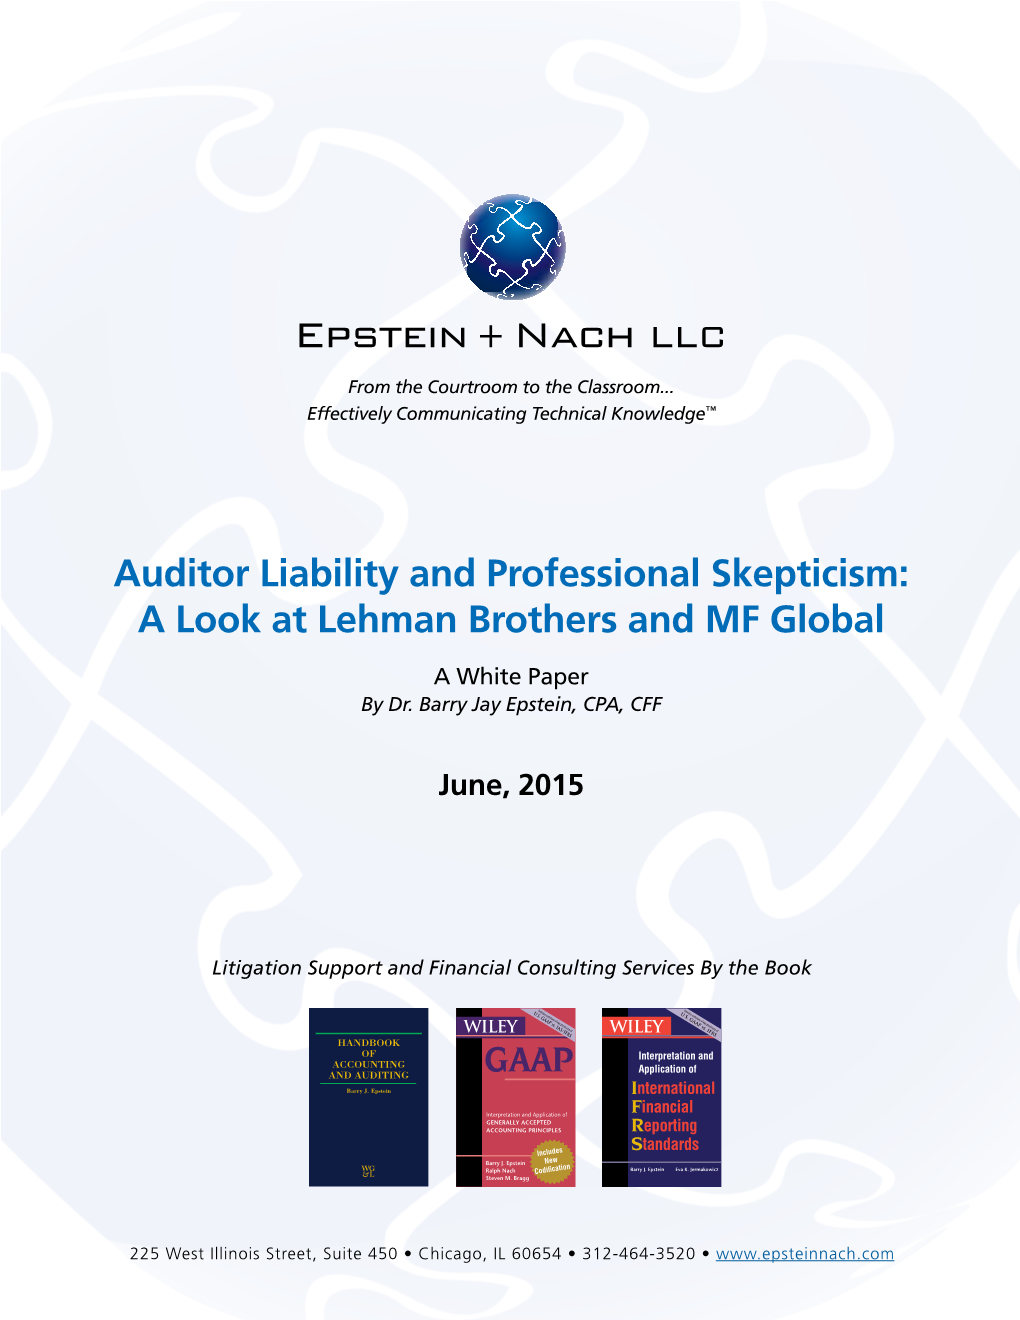 Auditor Liability and Professional Skepticism: a Look at Lehman Brothers and MF Global